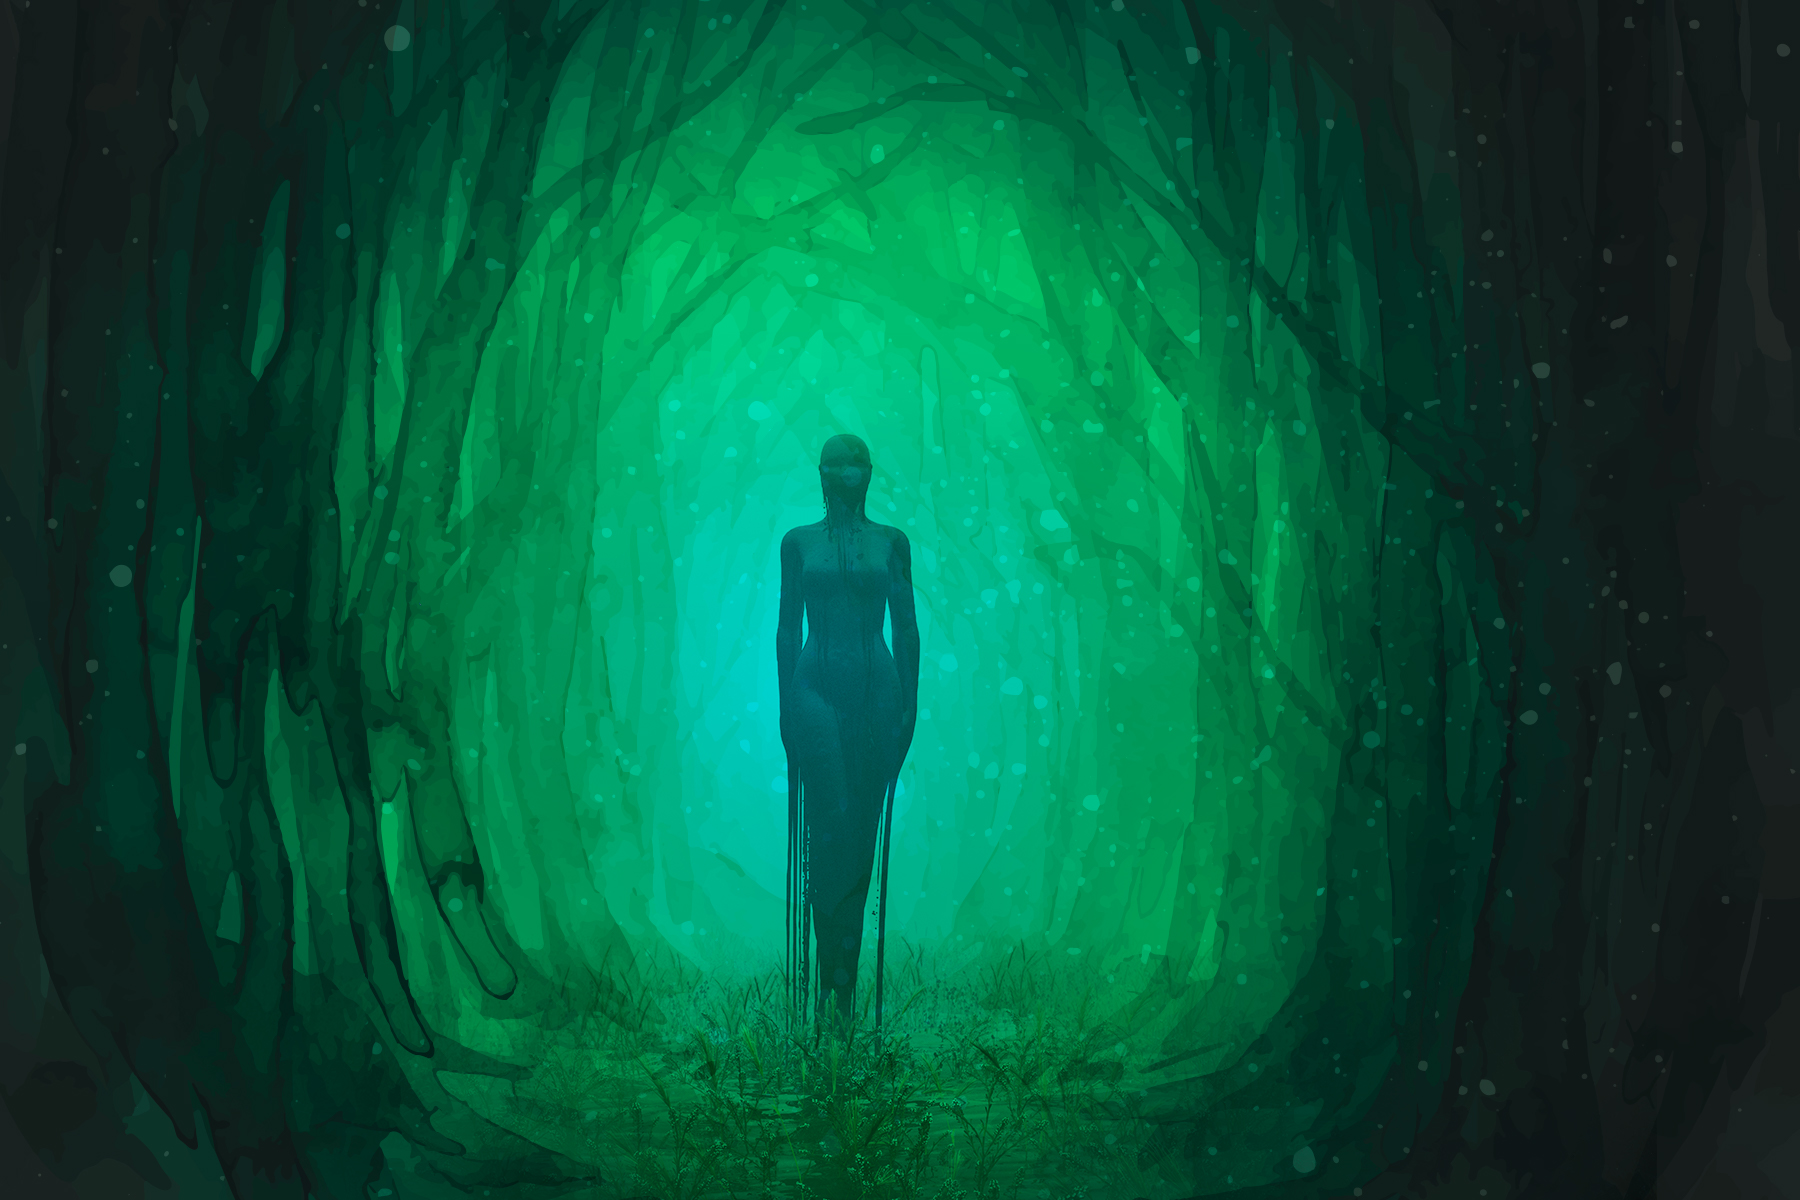 An illustration of a figure of a woman emerging from a green forest